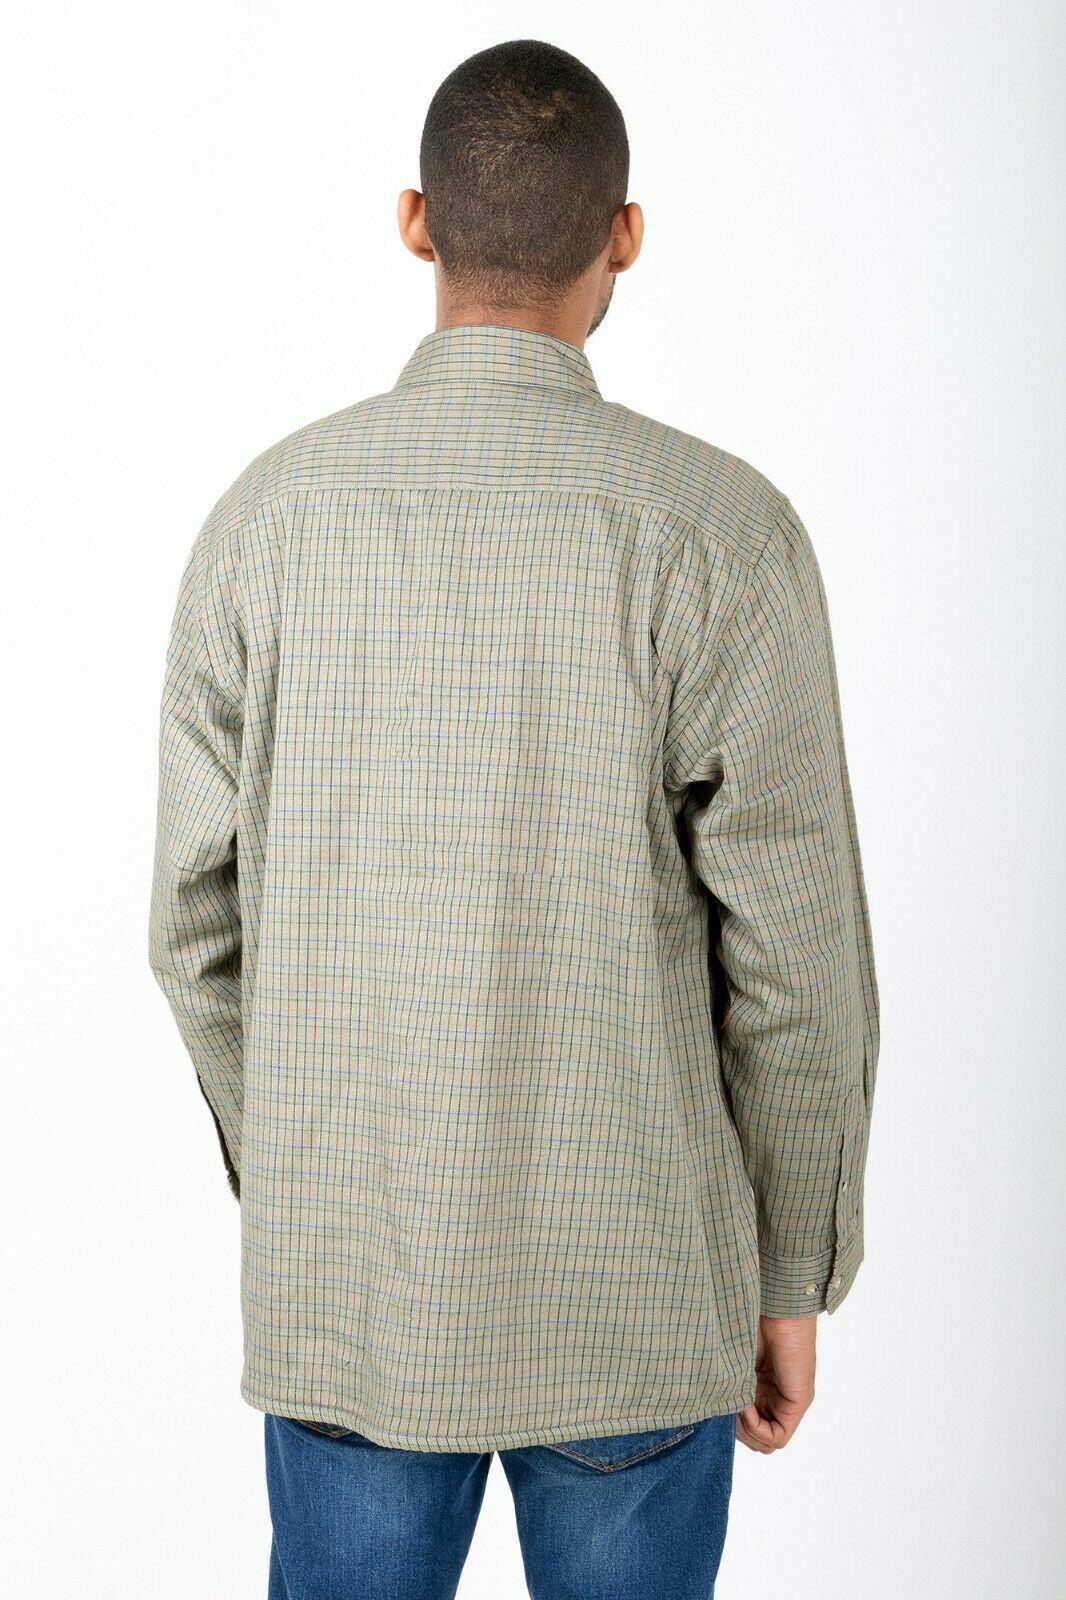 Hazy Blue Mens Long Sleeve Micro Fleece Lined Button Country Check Warm Shirts